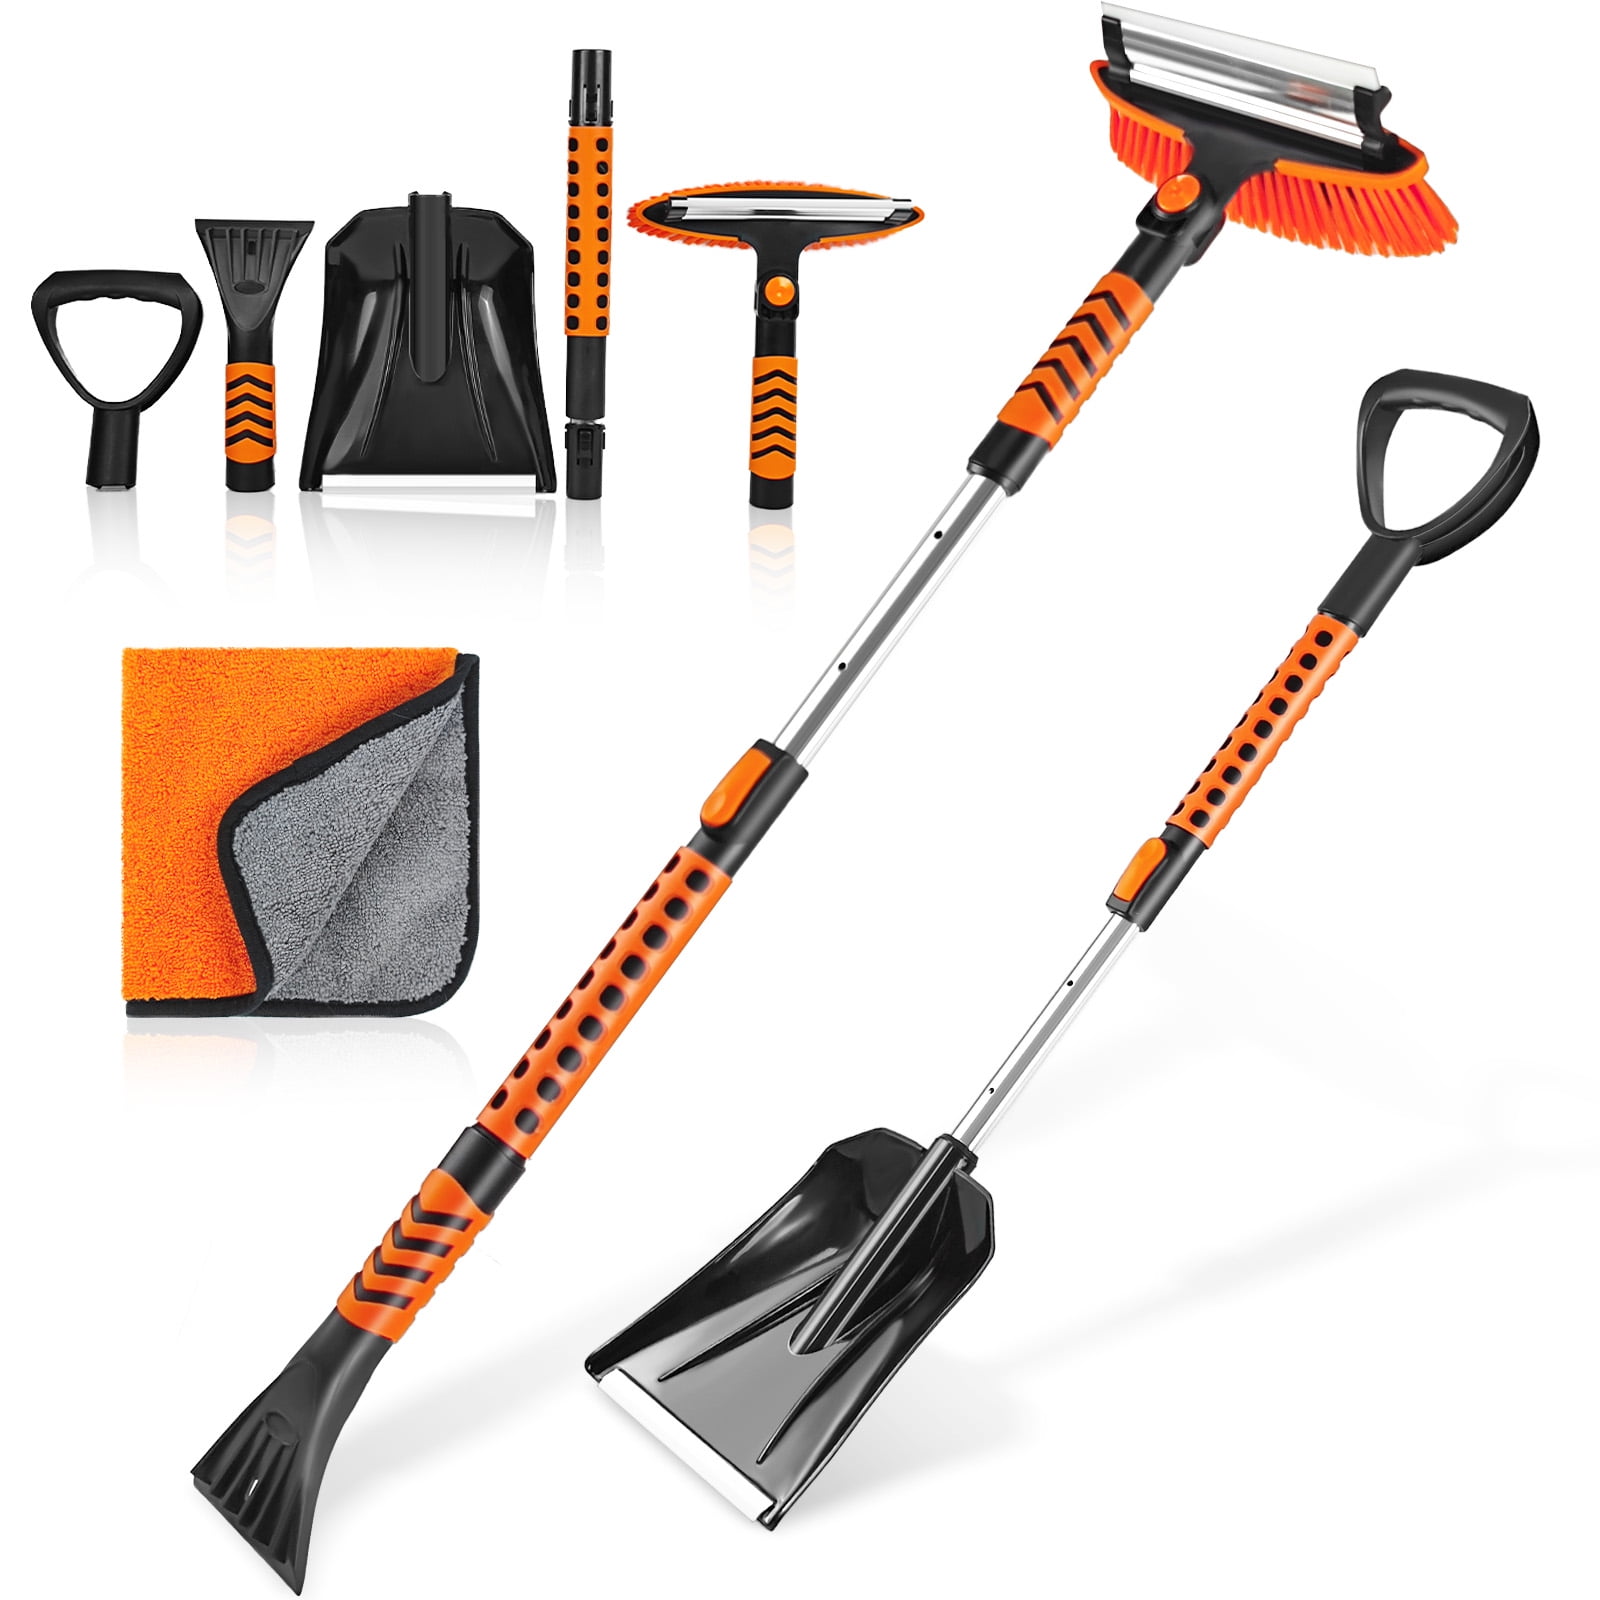 Dayooh 42 5 in 1 Snow Brush and Ice Scraper Snow Shovel for Car